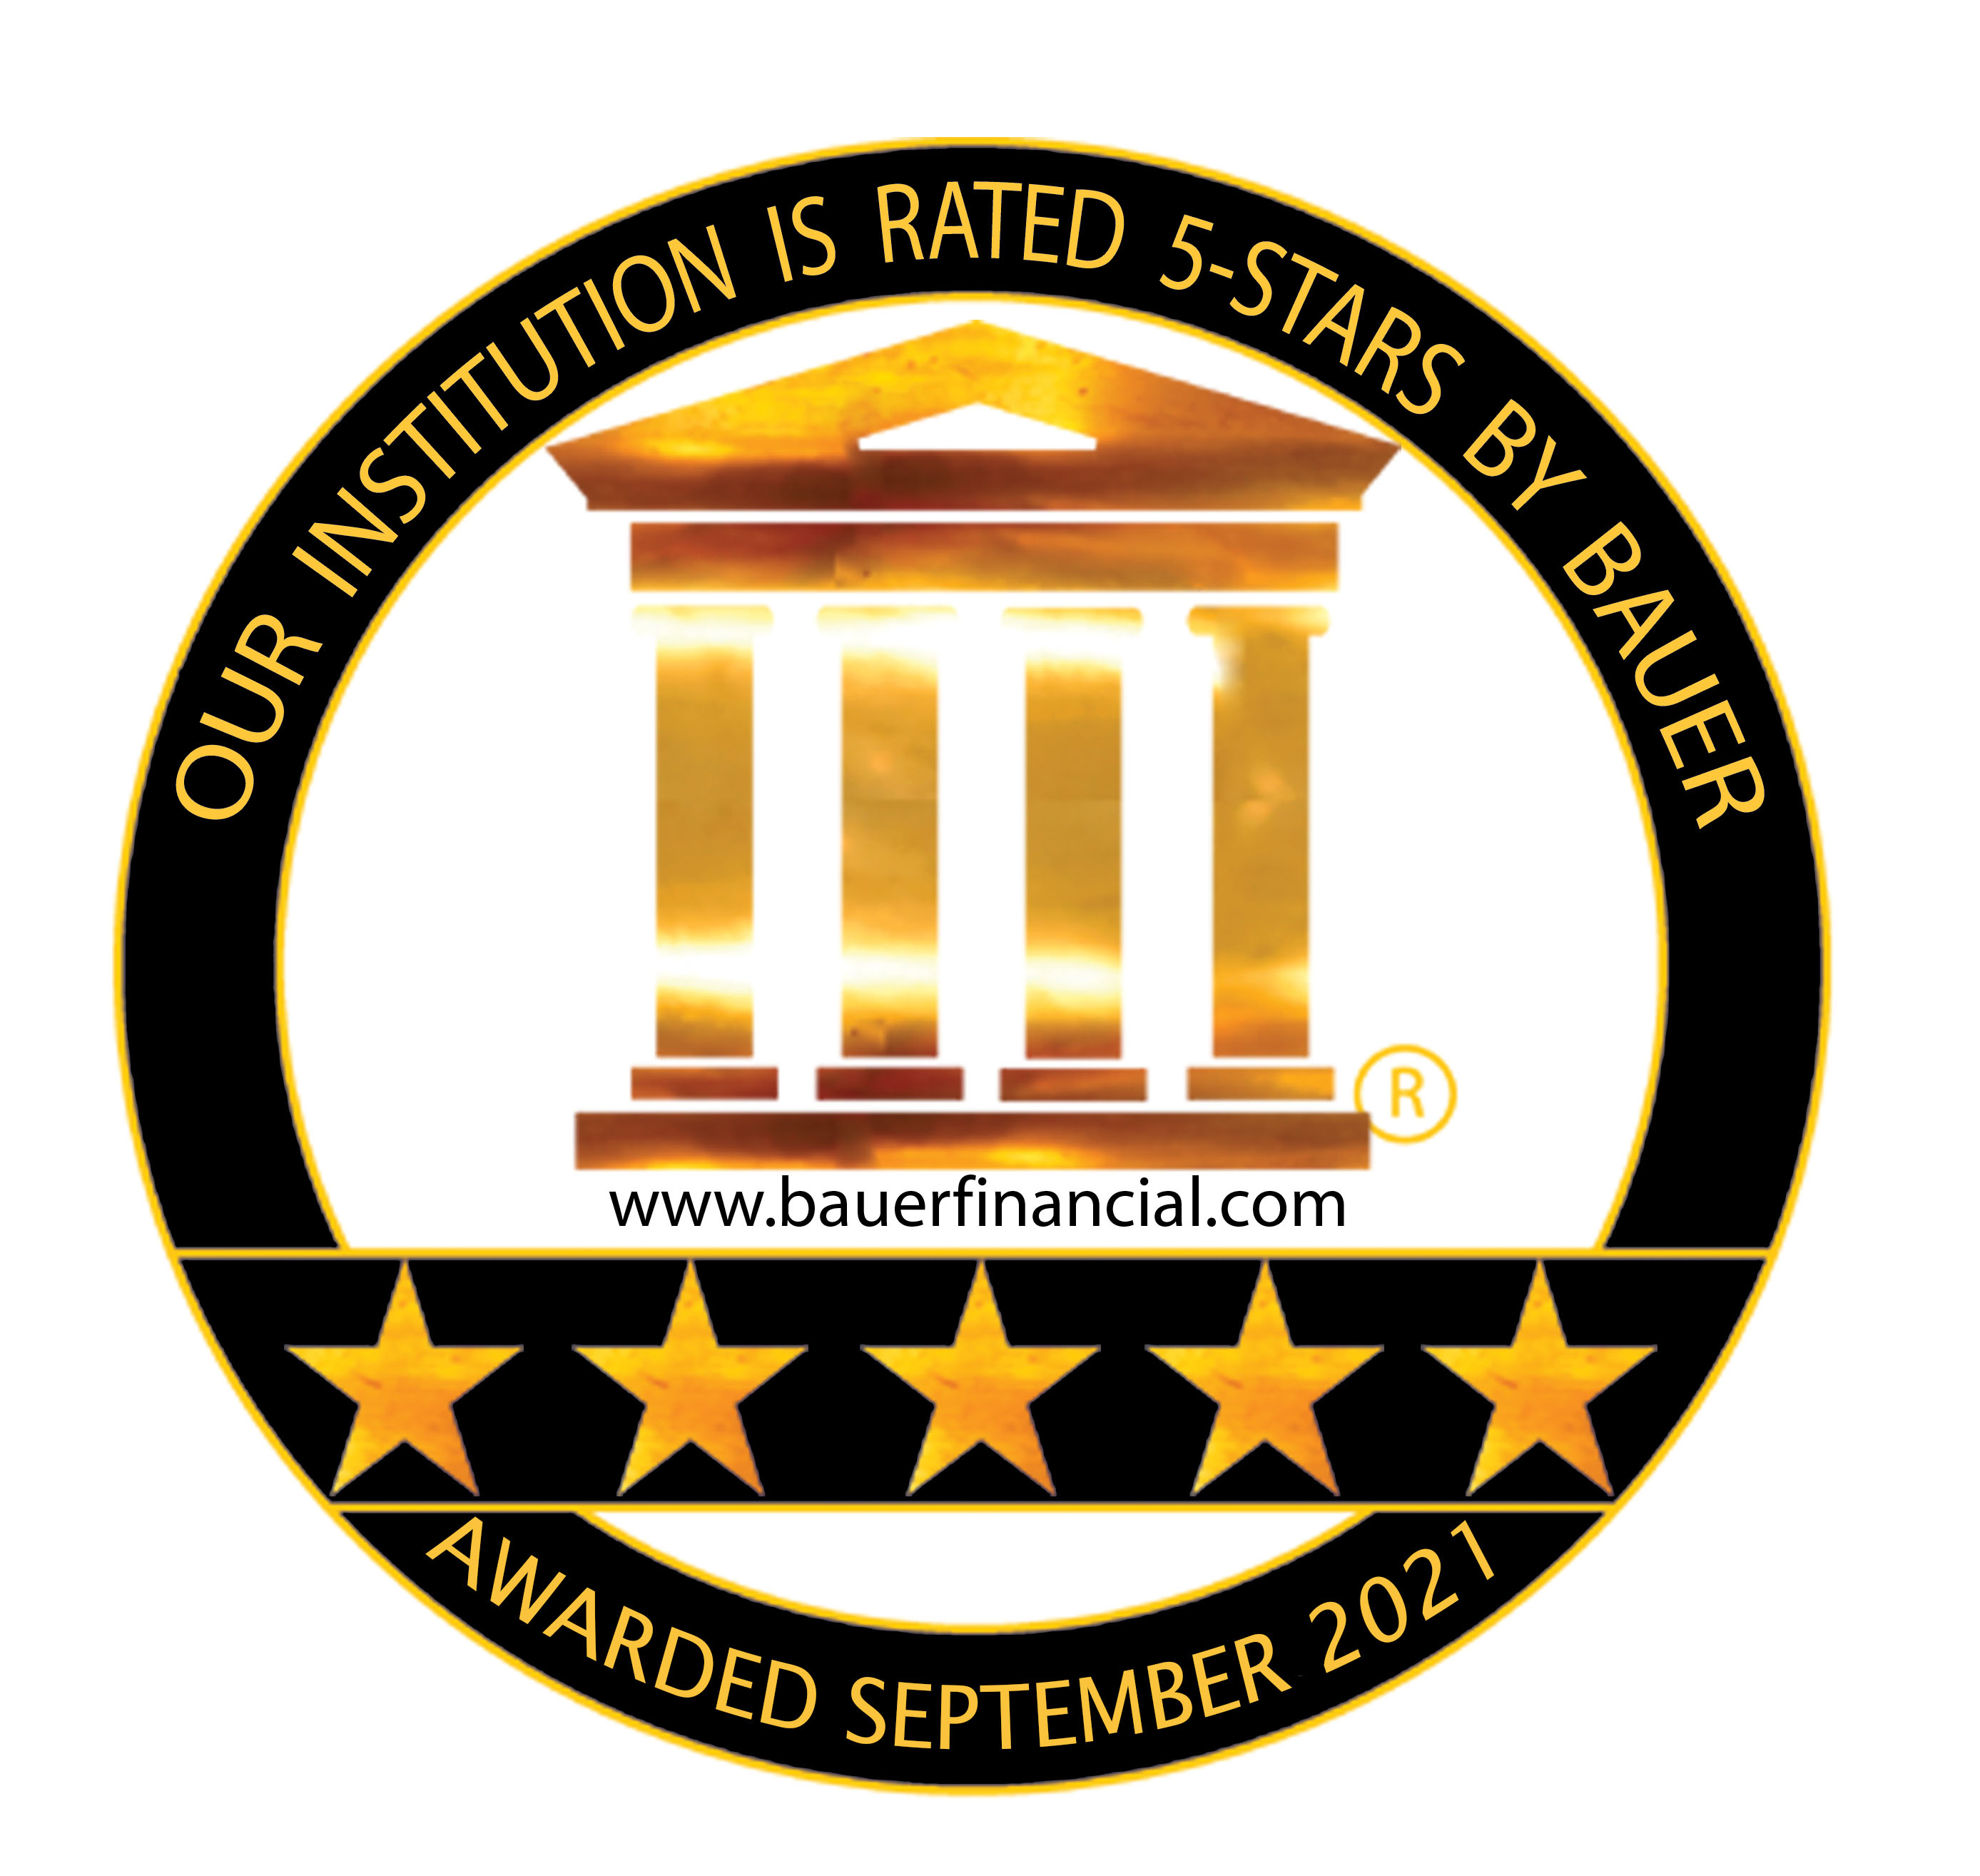 Bauer Financial Five Star Rating